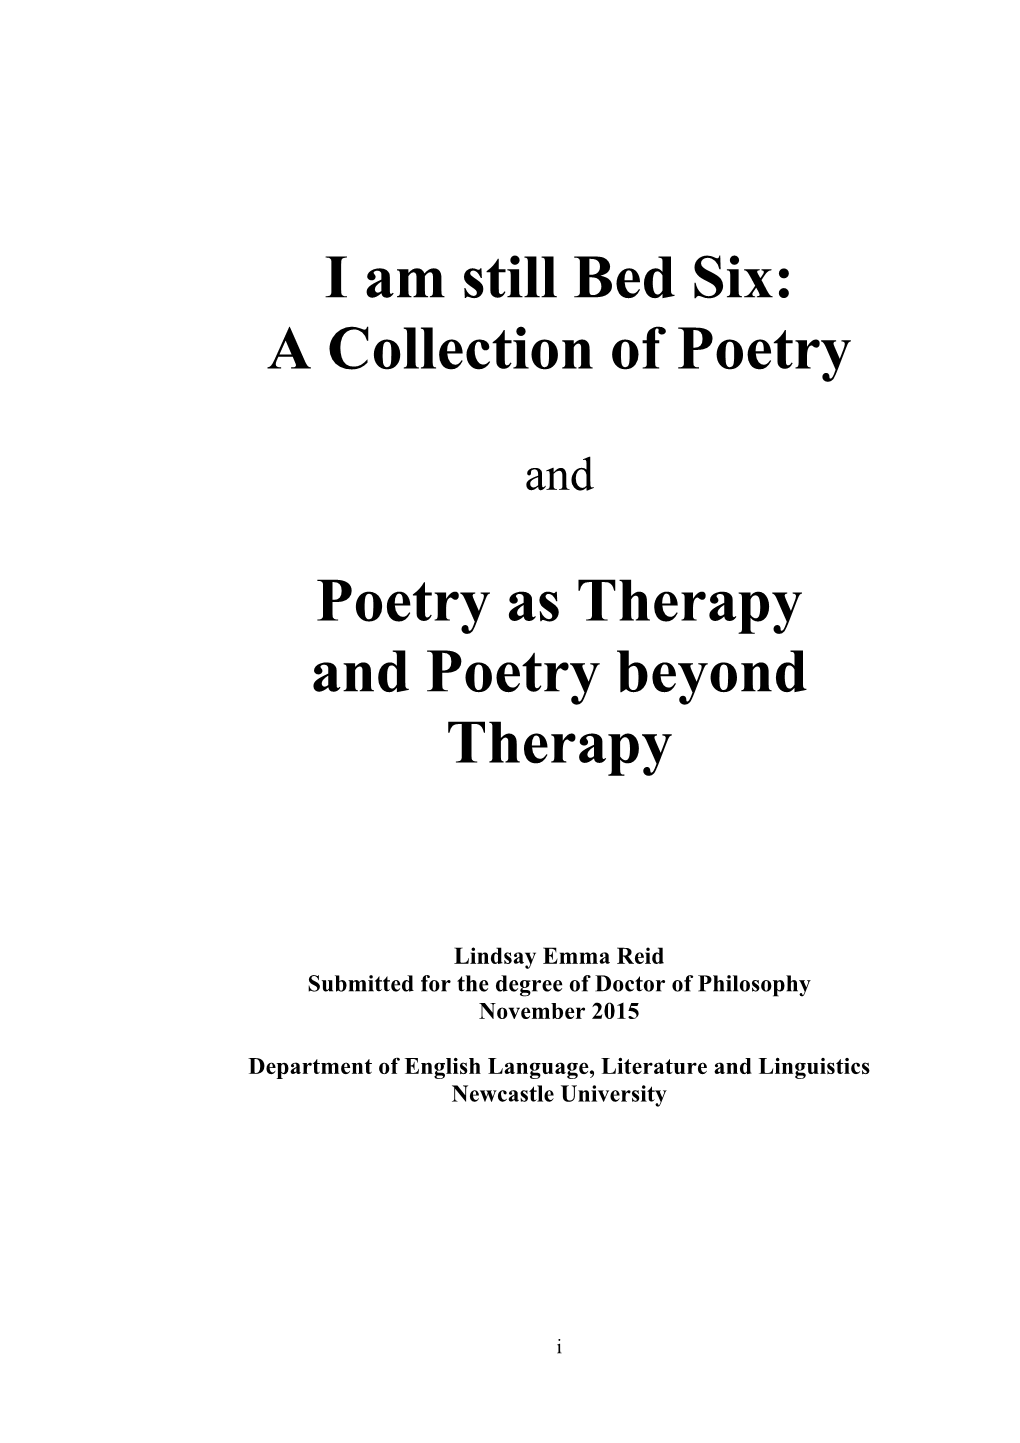 I Am Still Bed Six: a Collection of Poetry